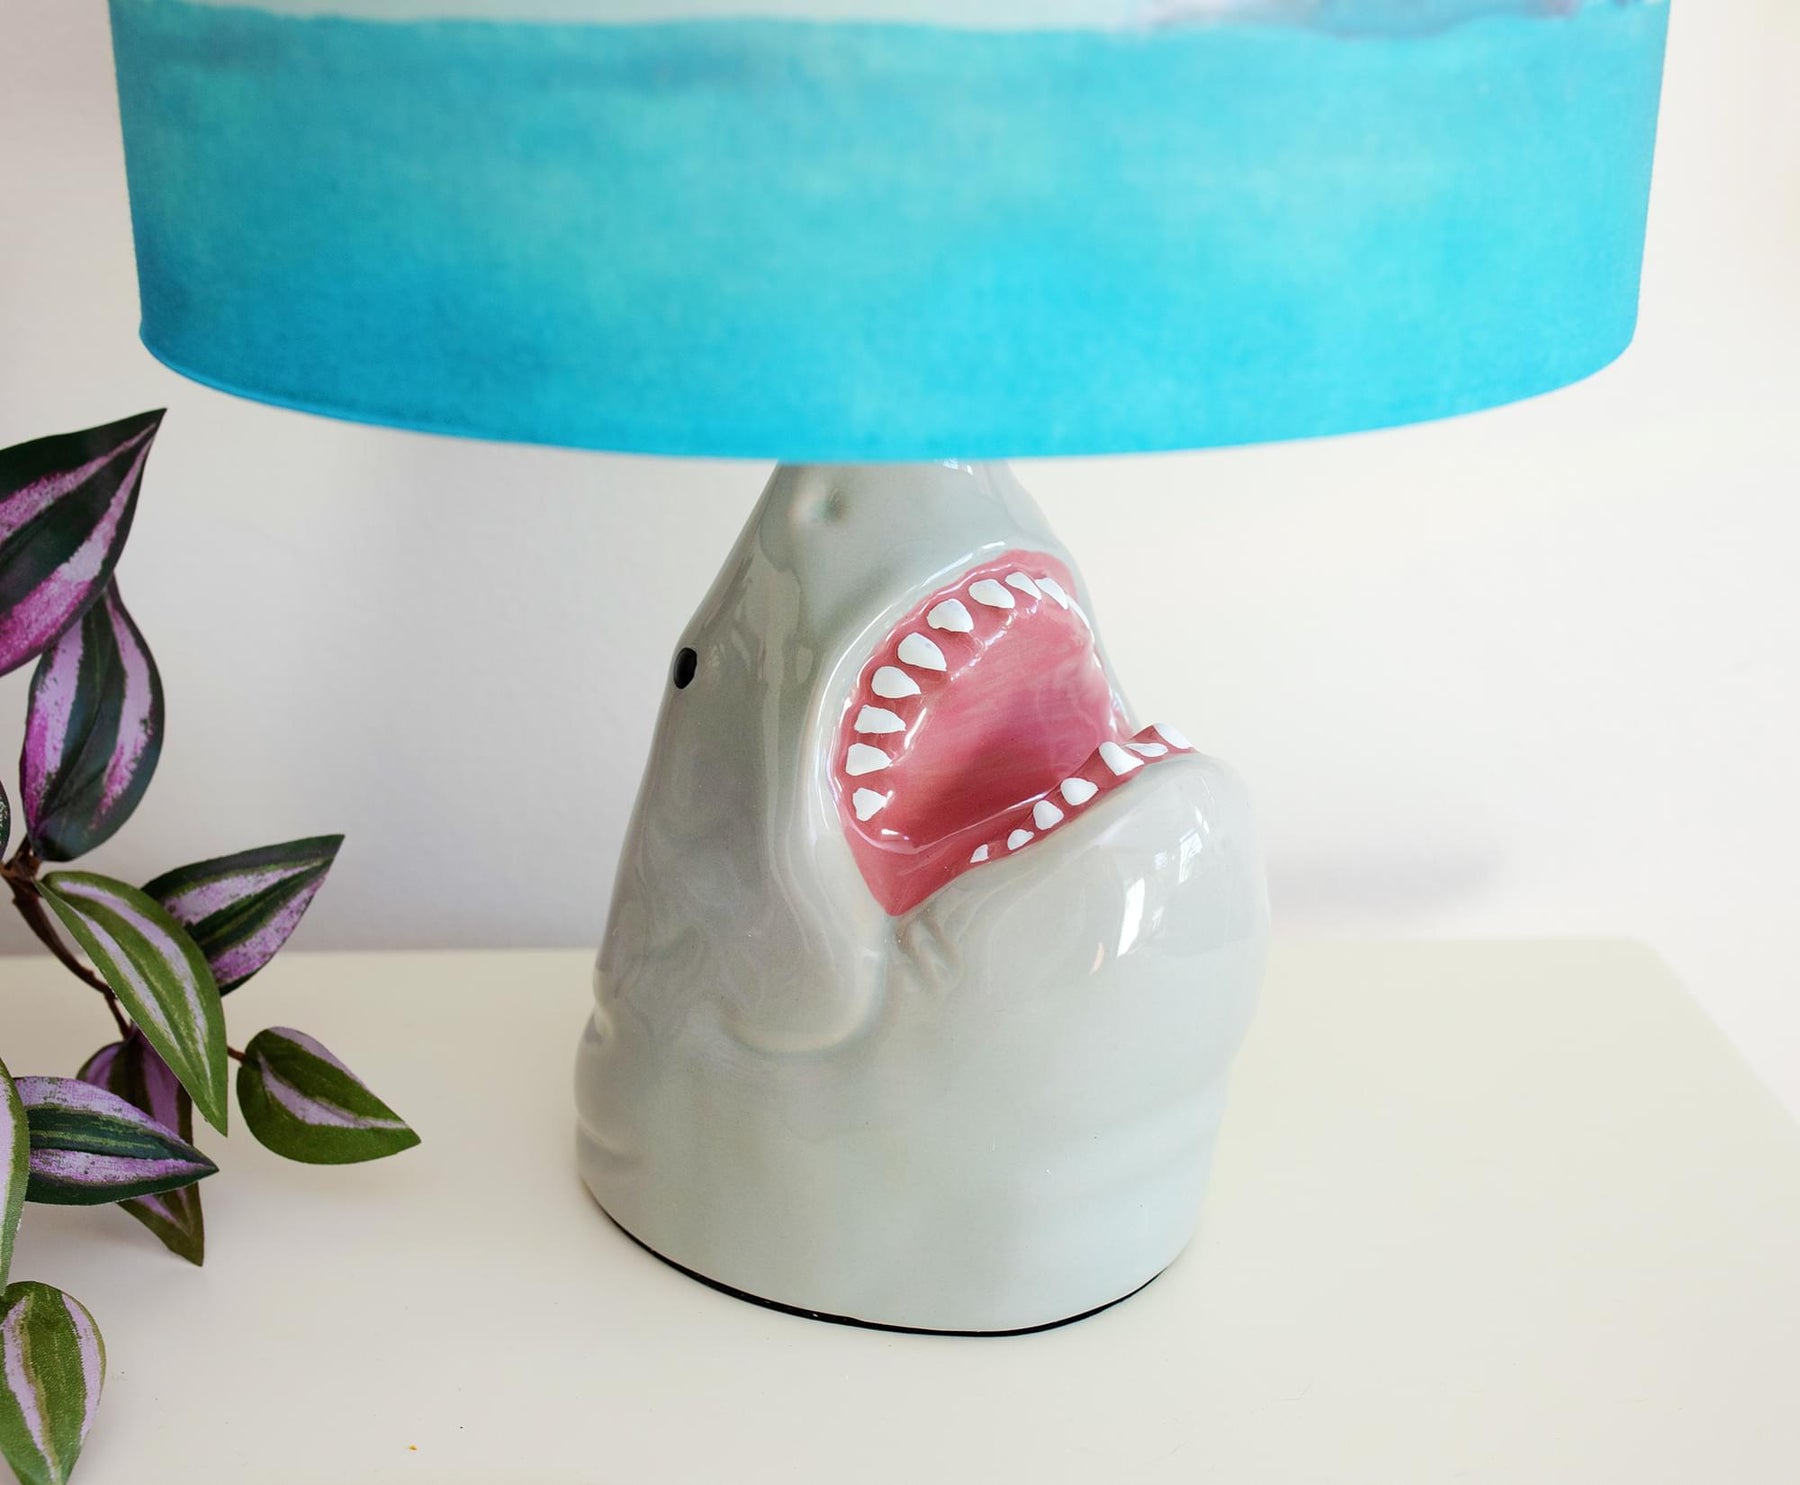 JAWS Classic Movie Poster Desk Lamp With Shark Figural Sculpt | 13 Inches Tall